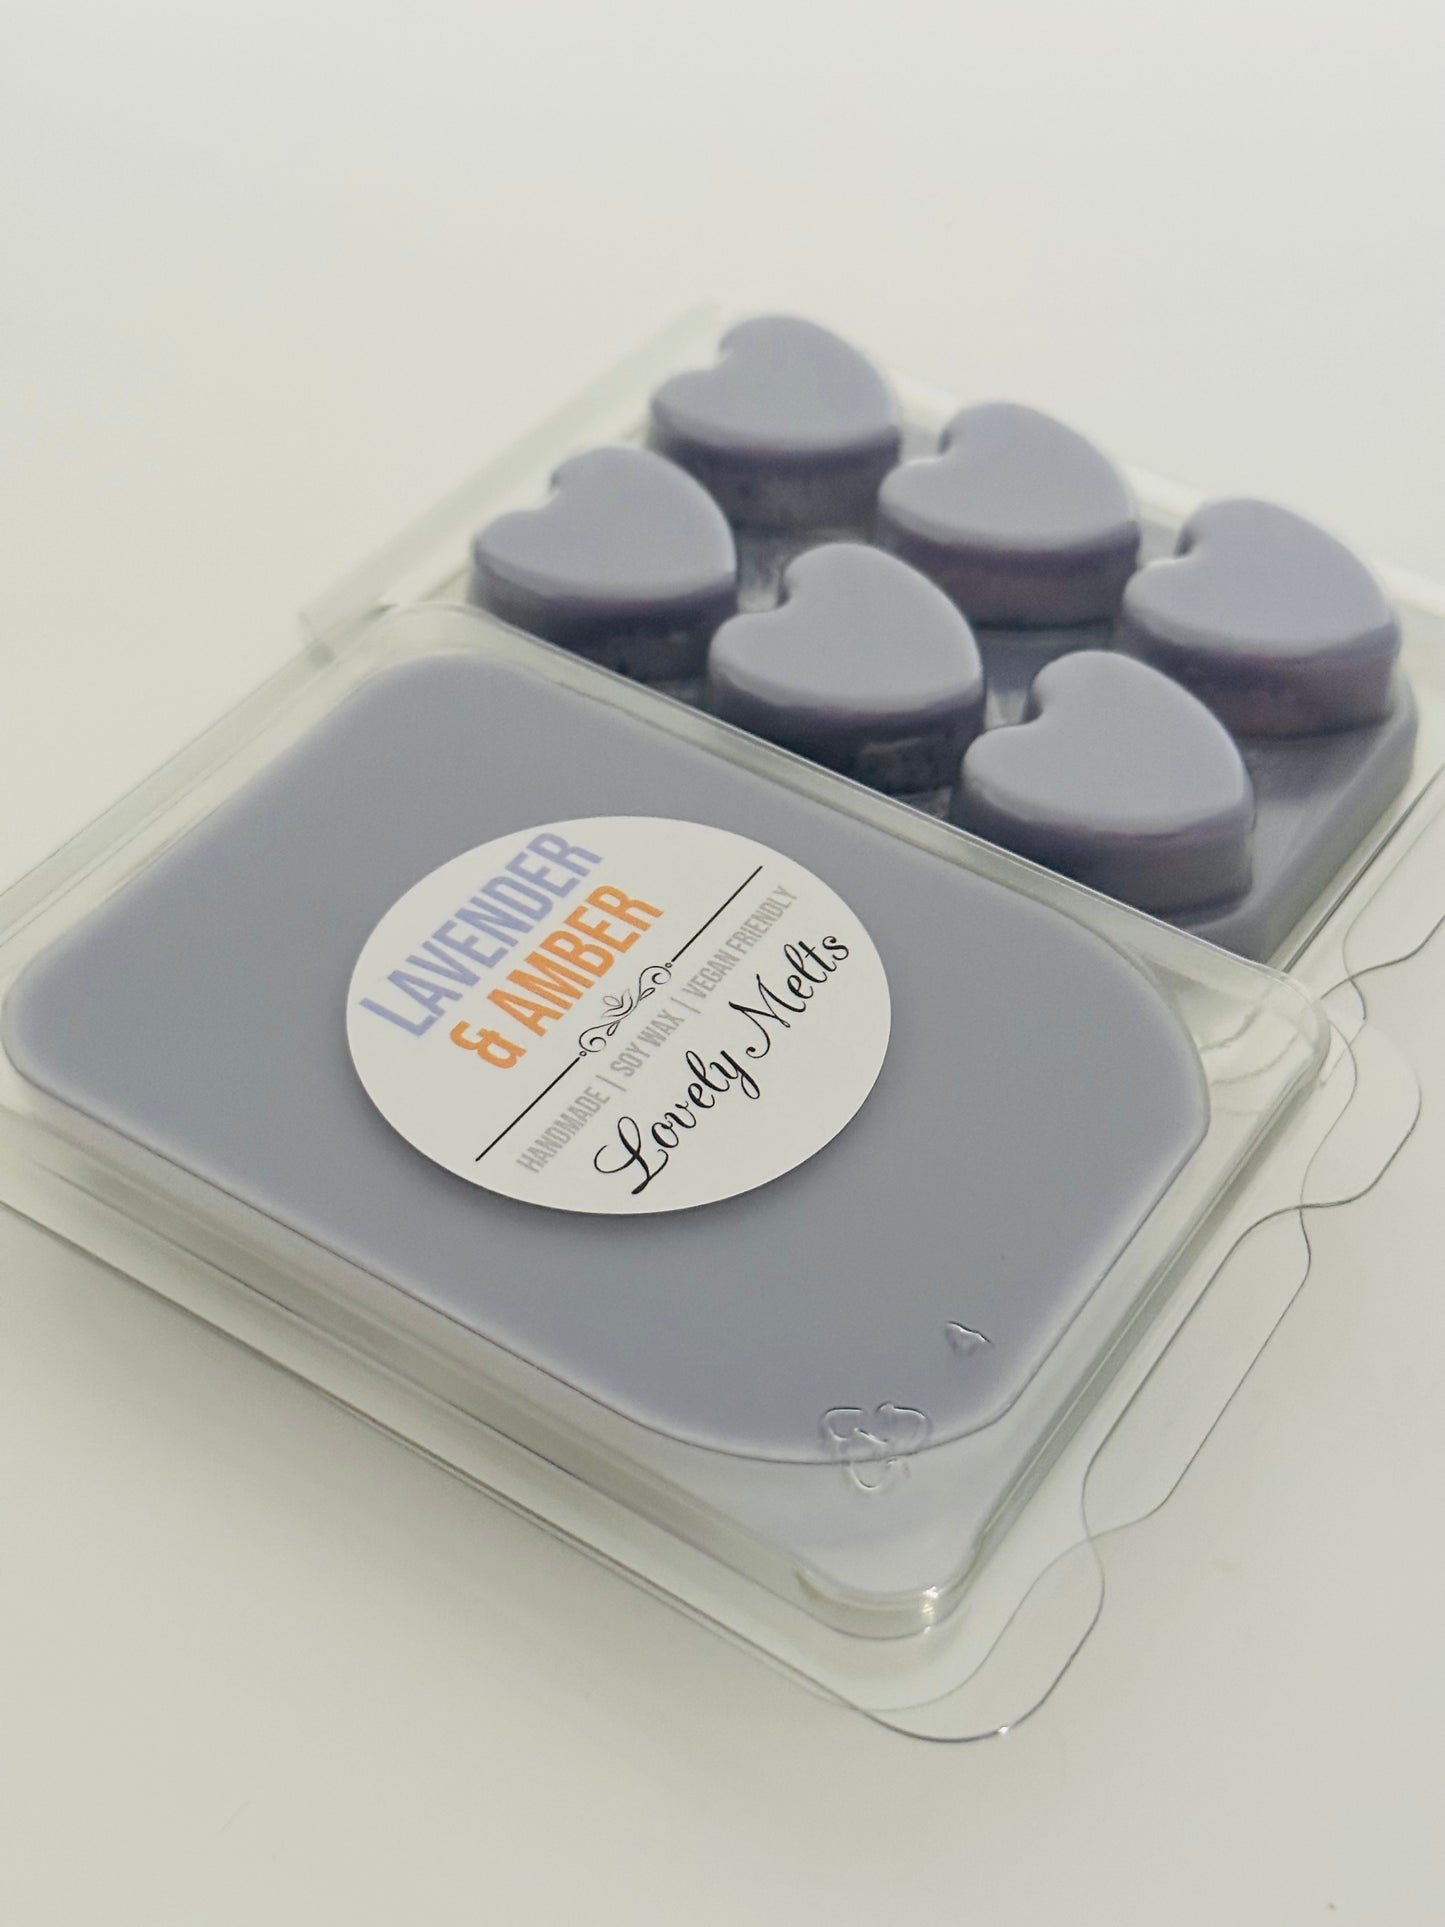 LAVENDER & AMBER SOY WAX MELTS